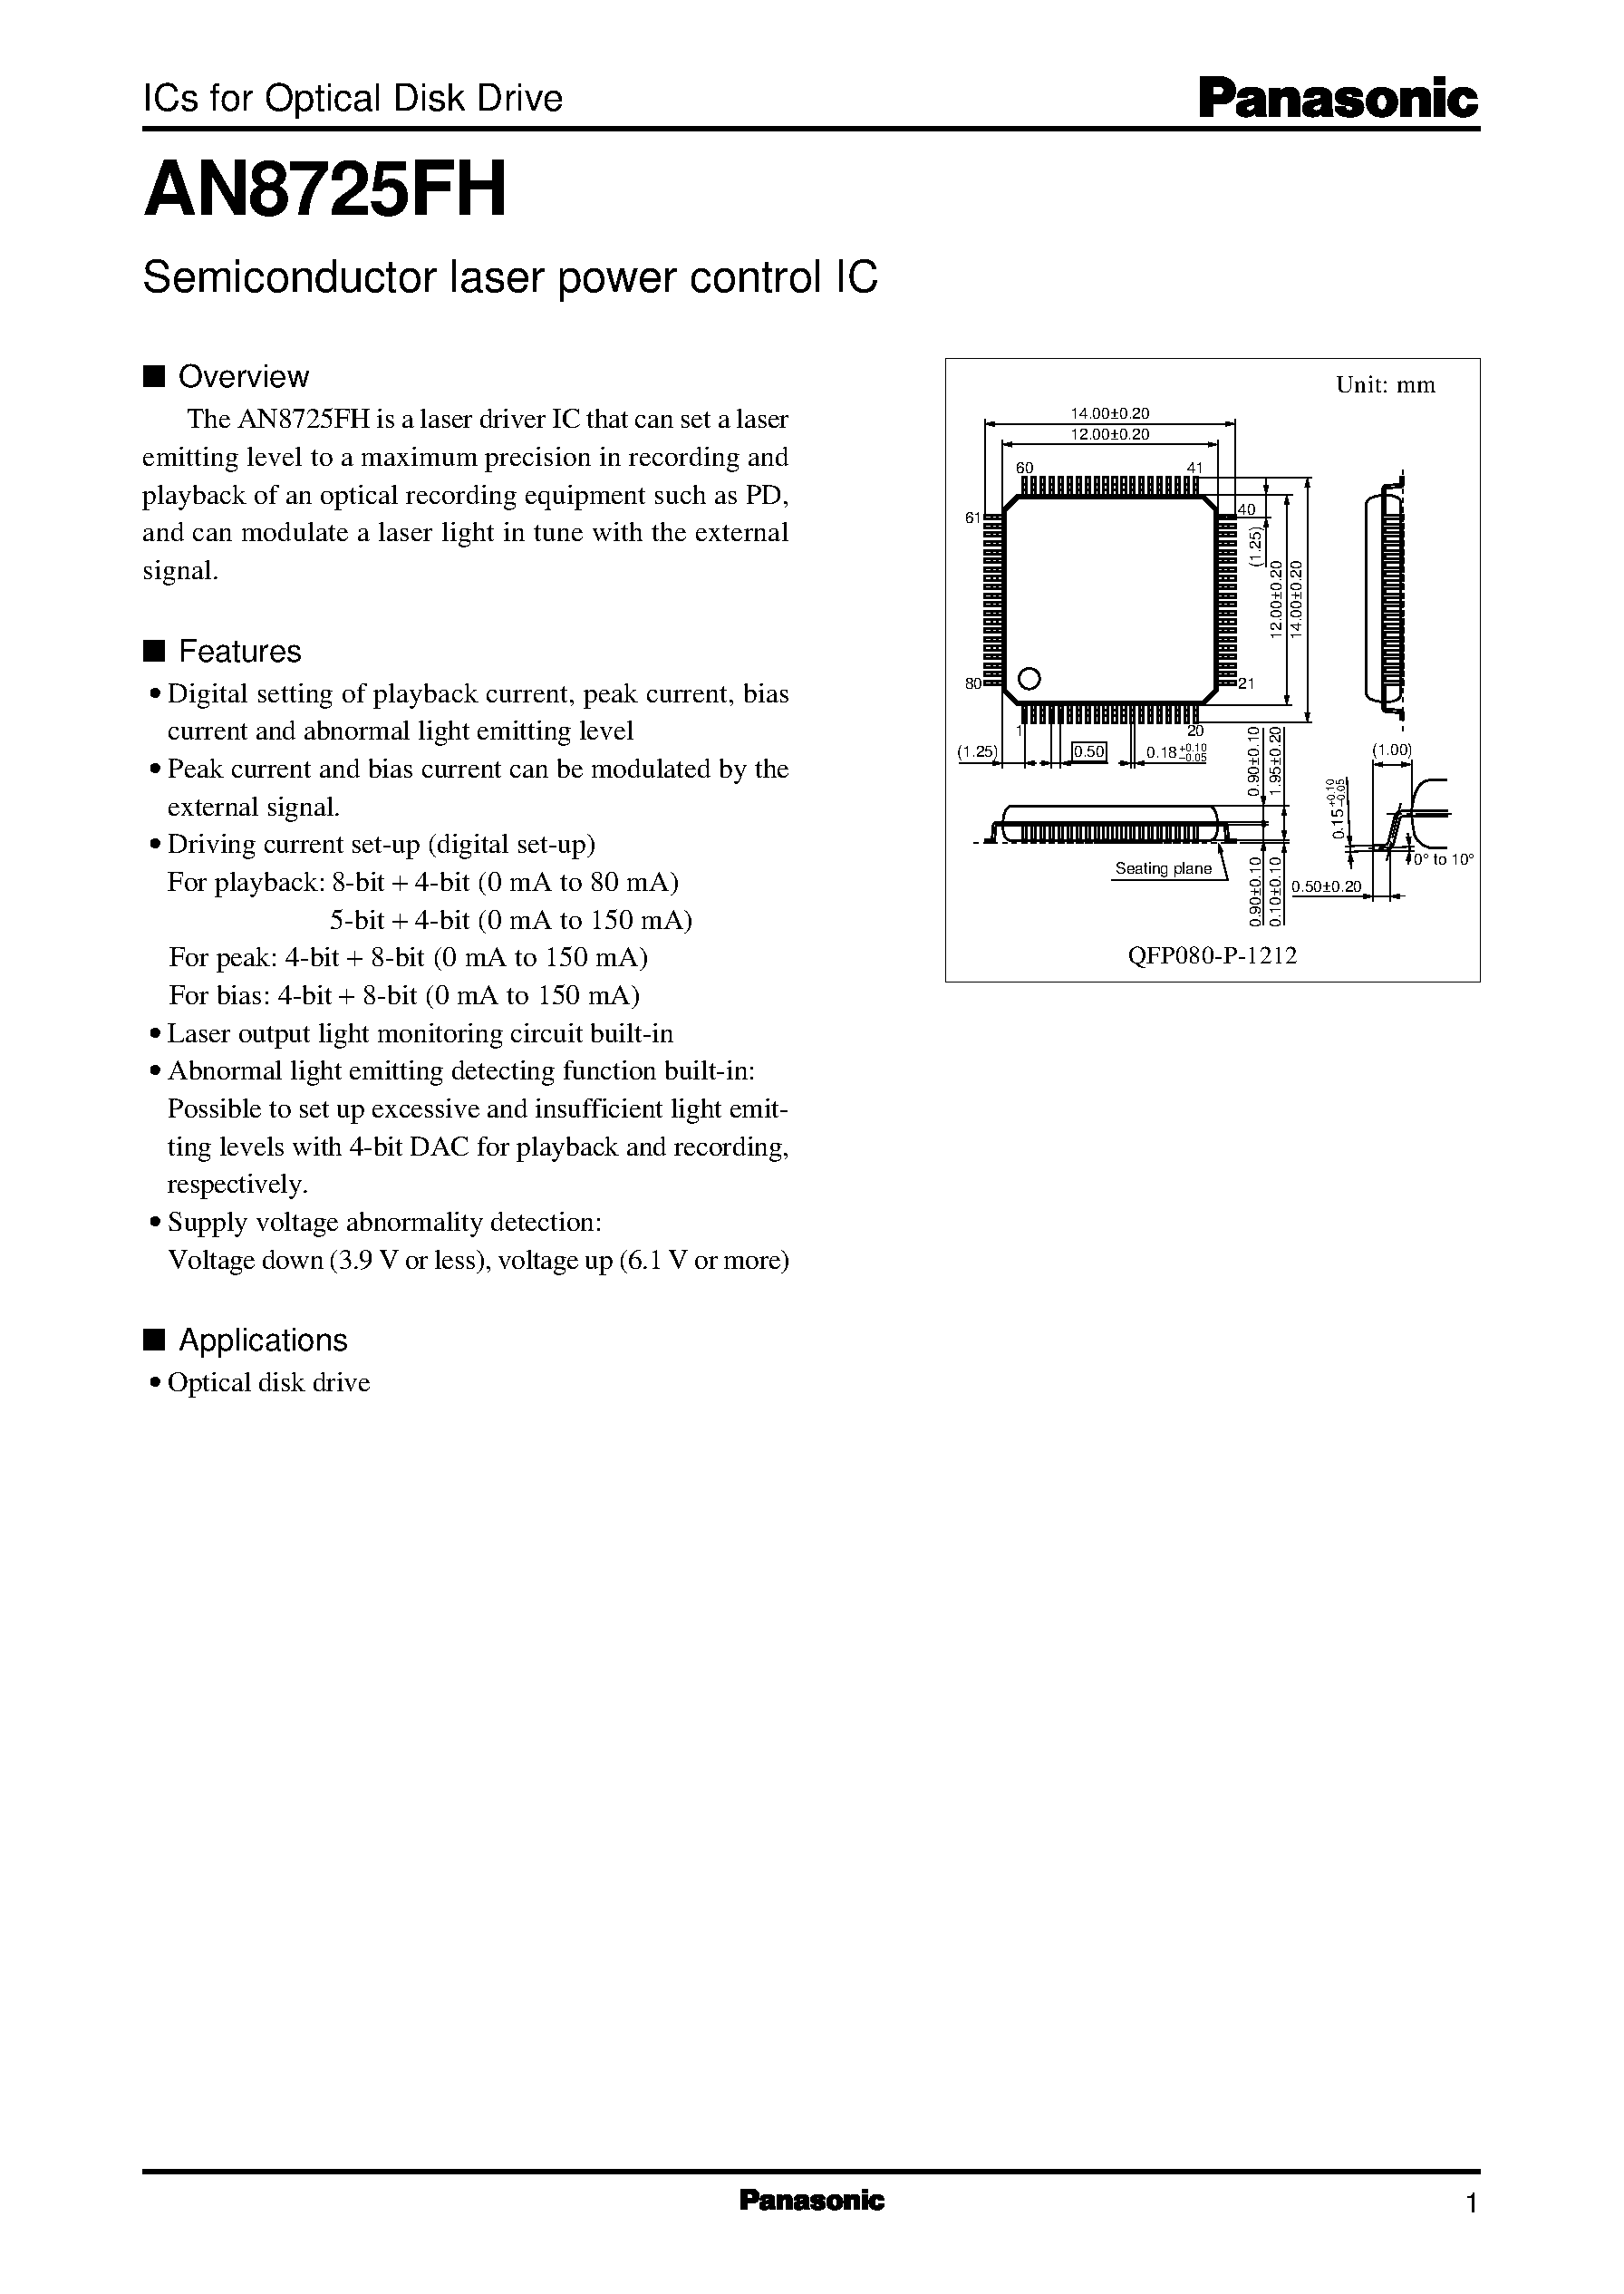 Datasheet AN8725FH - Semiconductor laser power control IC page 1